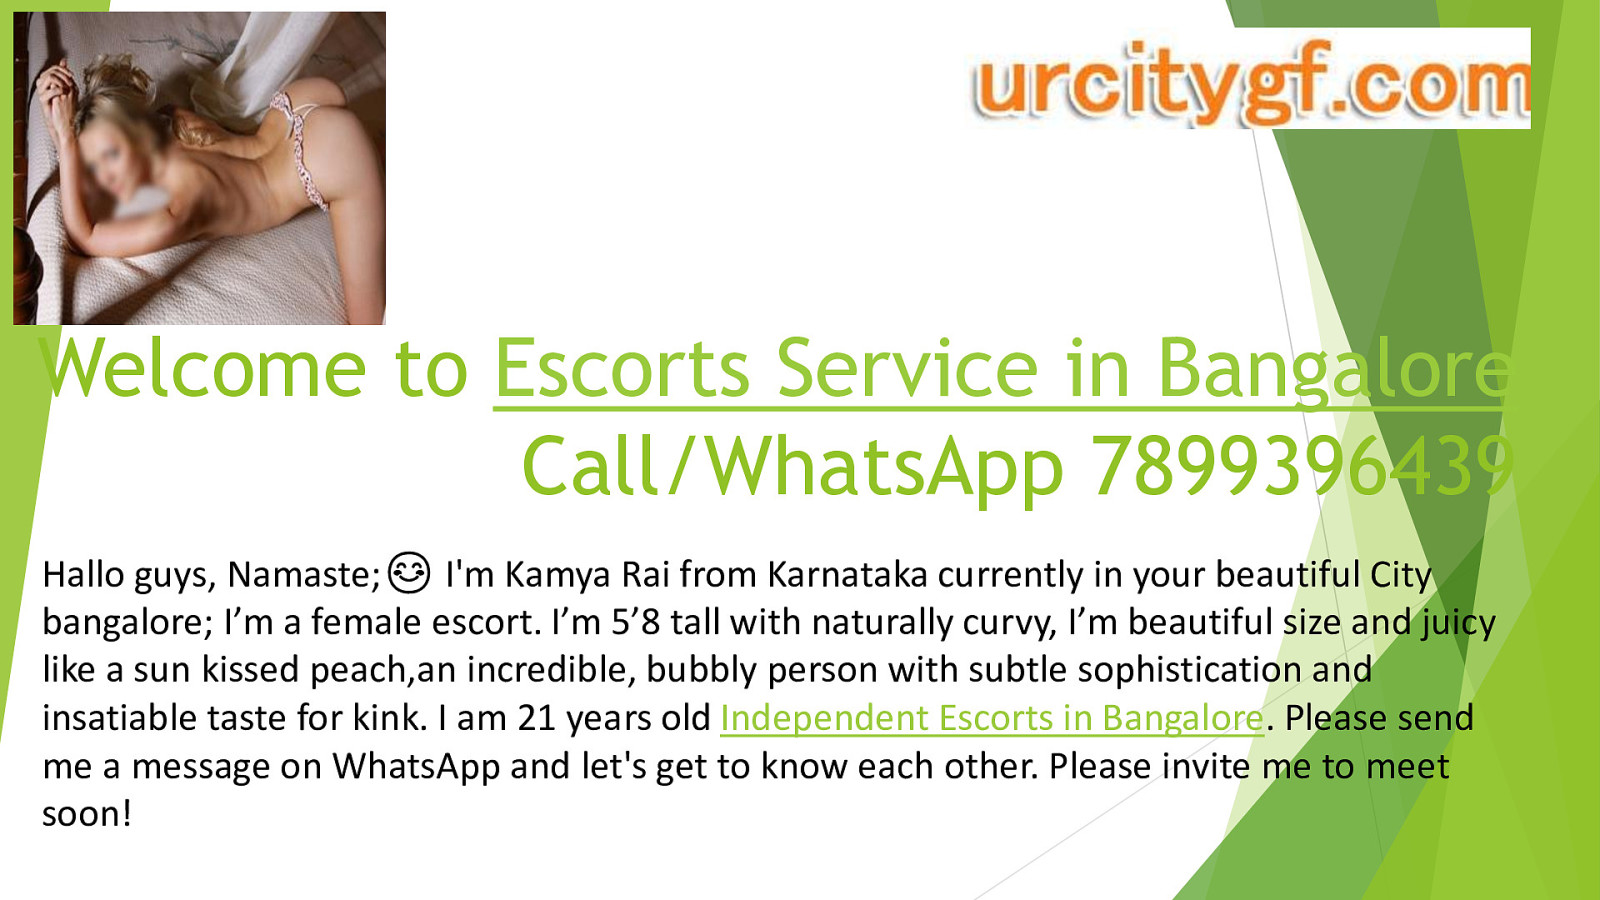 Major Activities to Engage with Bangalore Escorts in Bangalore by urcitygf